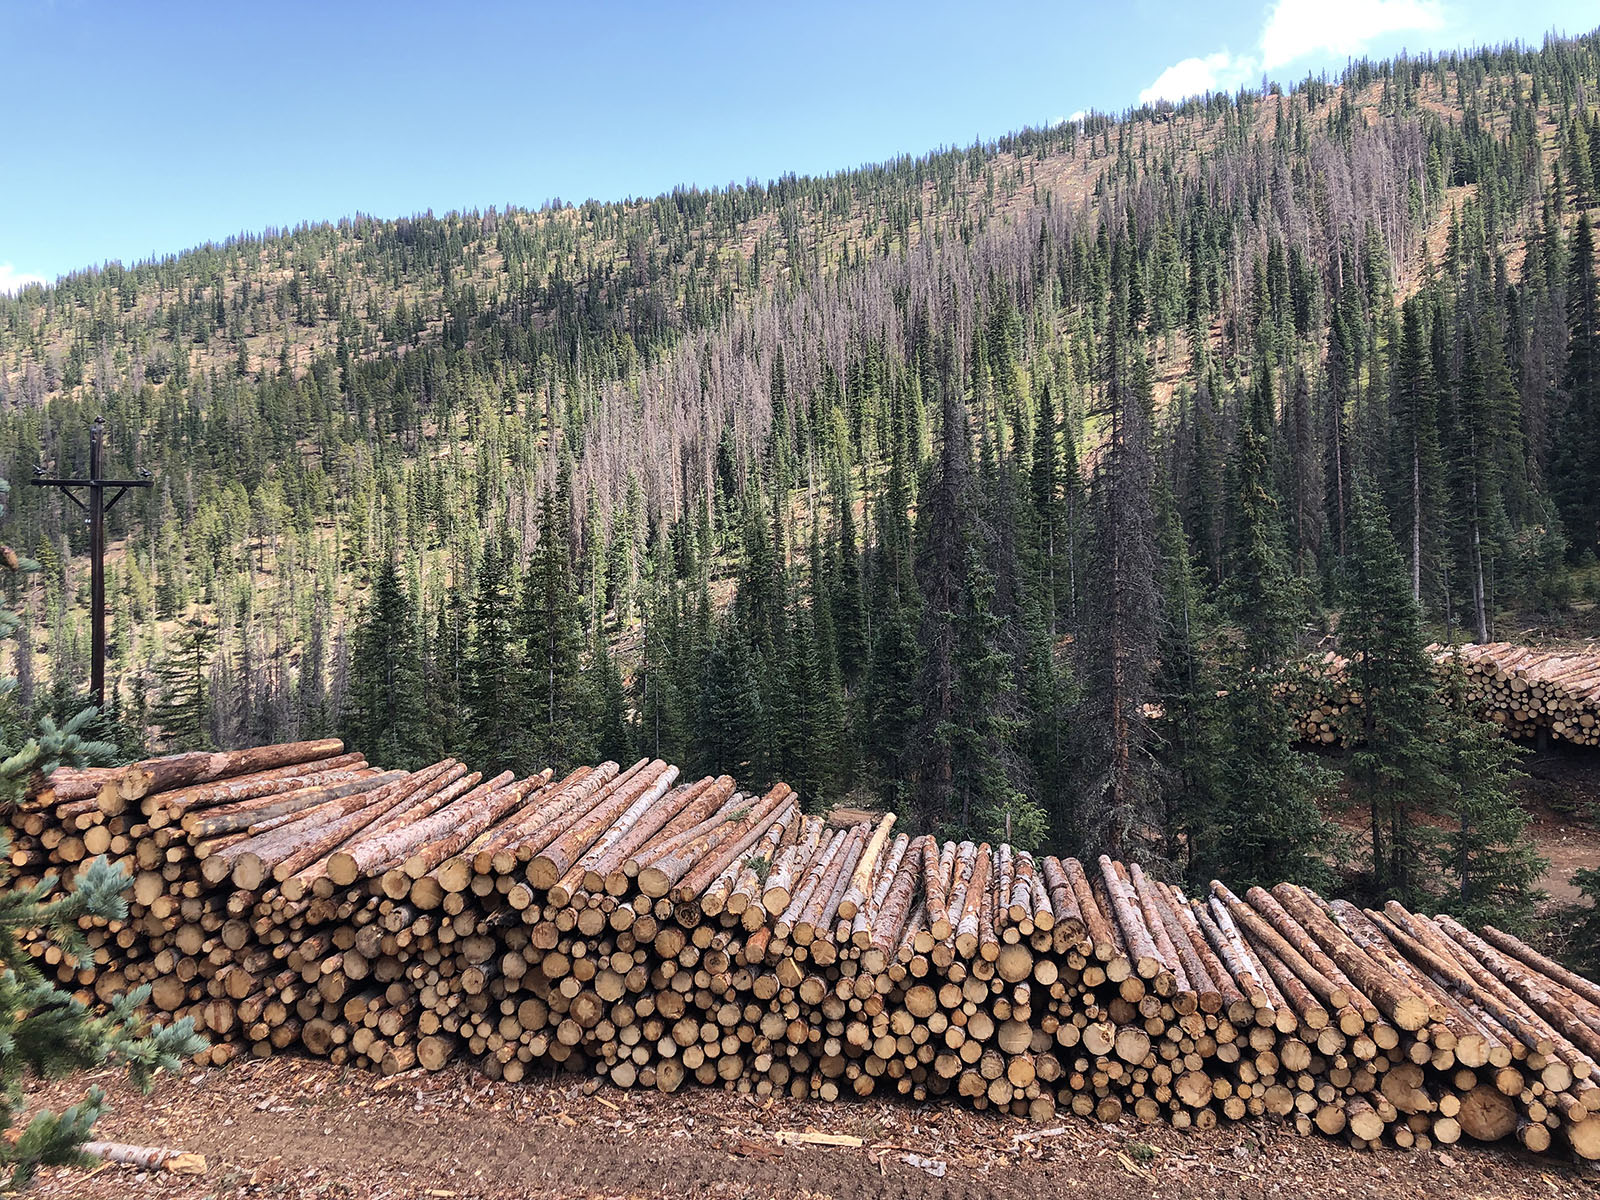 Making a Difference at Monarch Pass